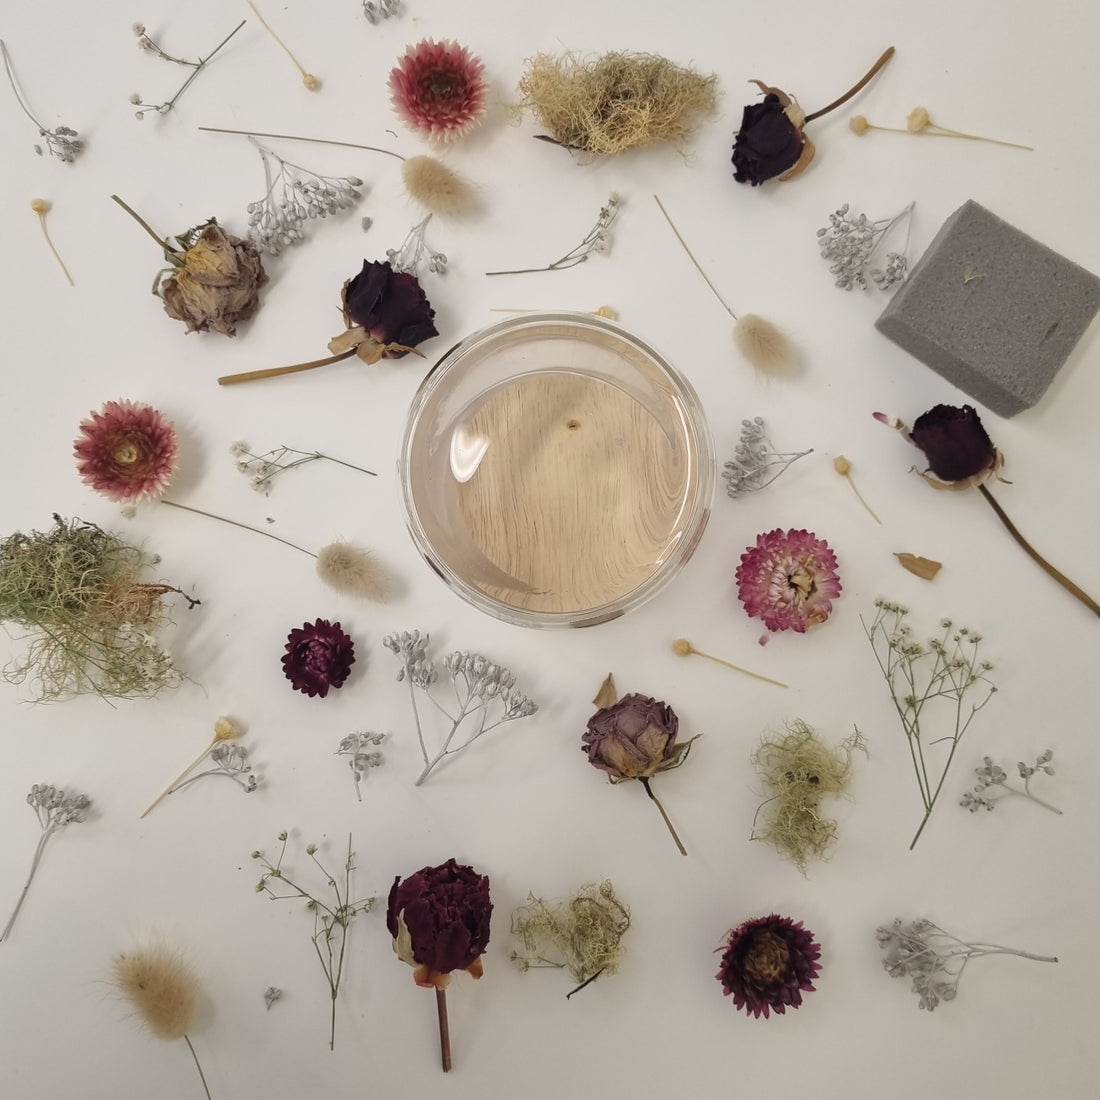 Arrangement of the Floral Dome Kit components, including dried flowers, foliage and other supplies.